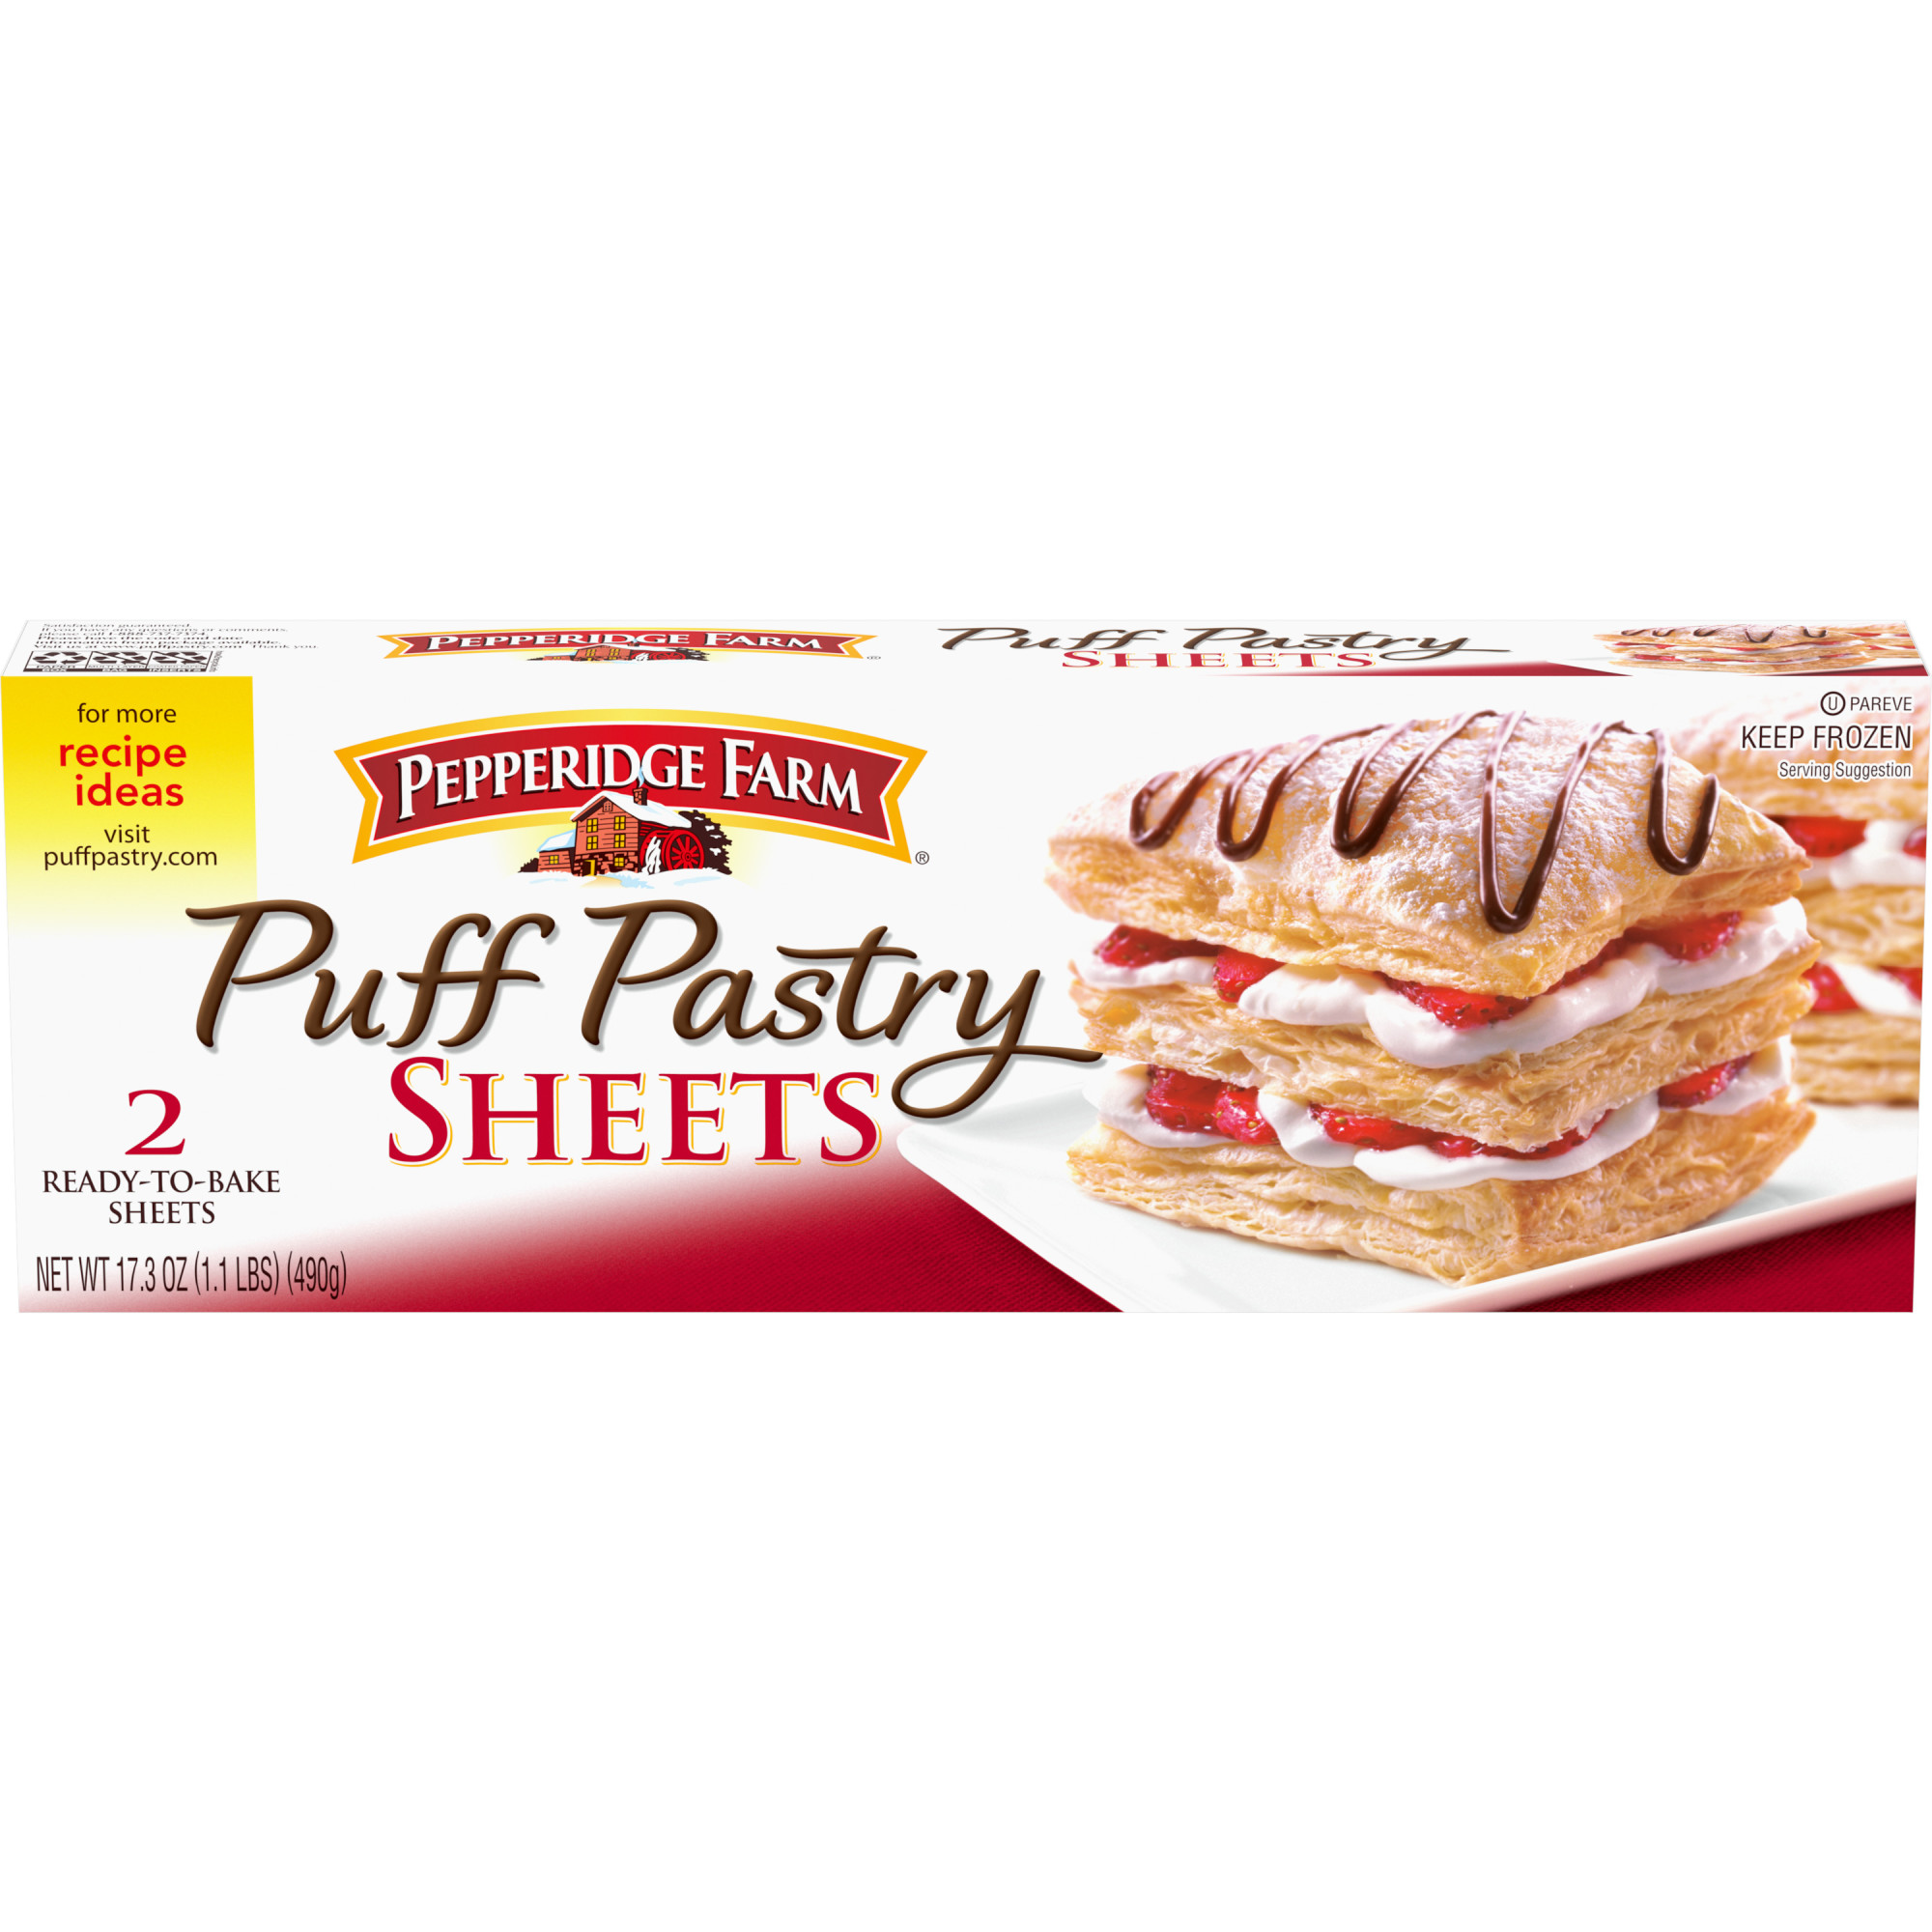 Pepperidge Farm Puff Pastry Frozen Pastry Dough Sheets, 2-Count, 17.3 oz. Box - image 1 of 8